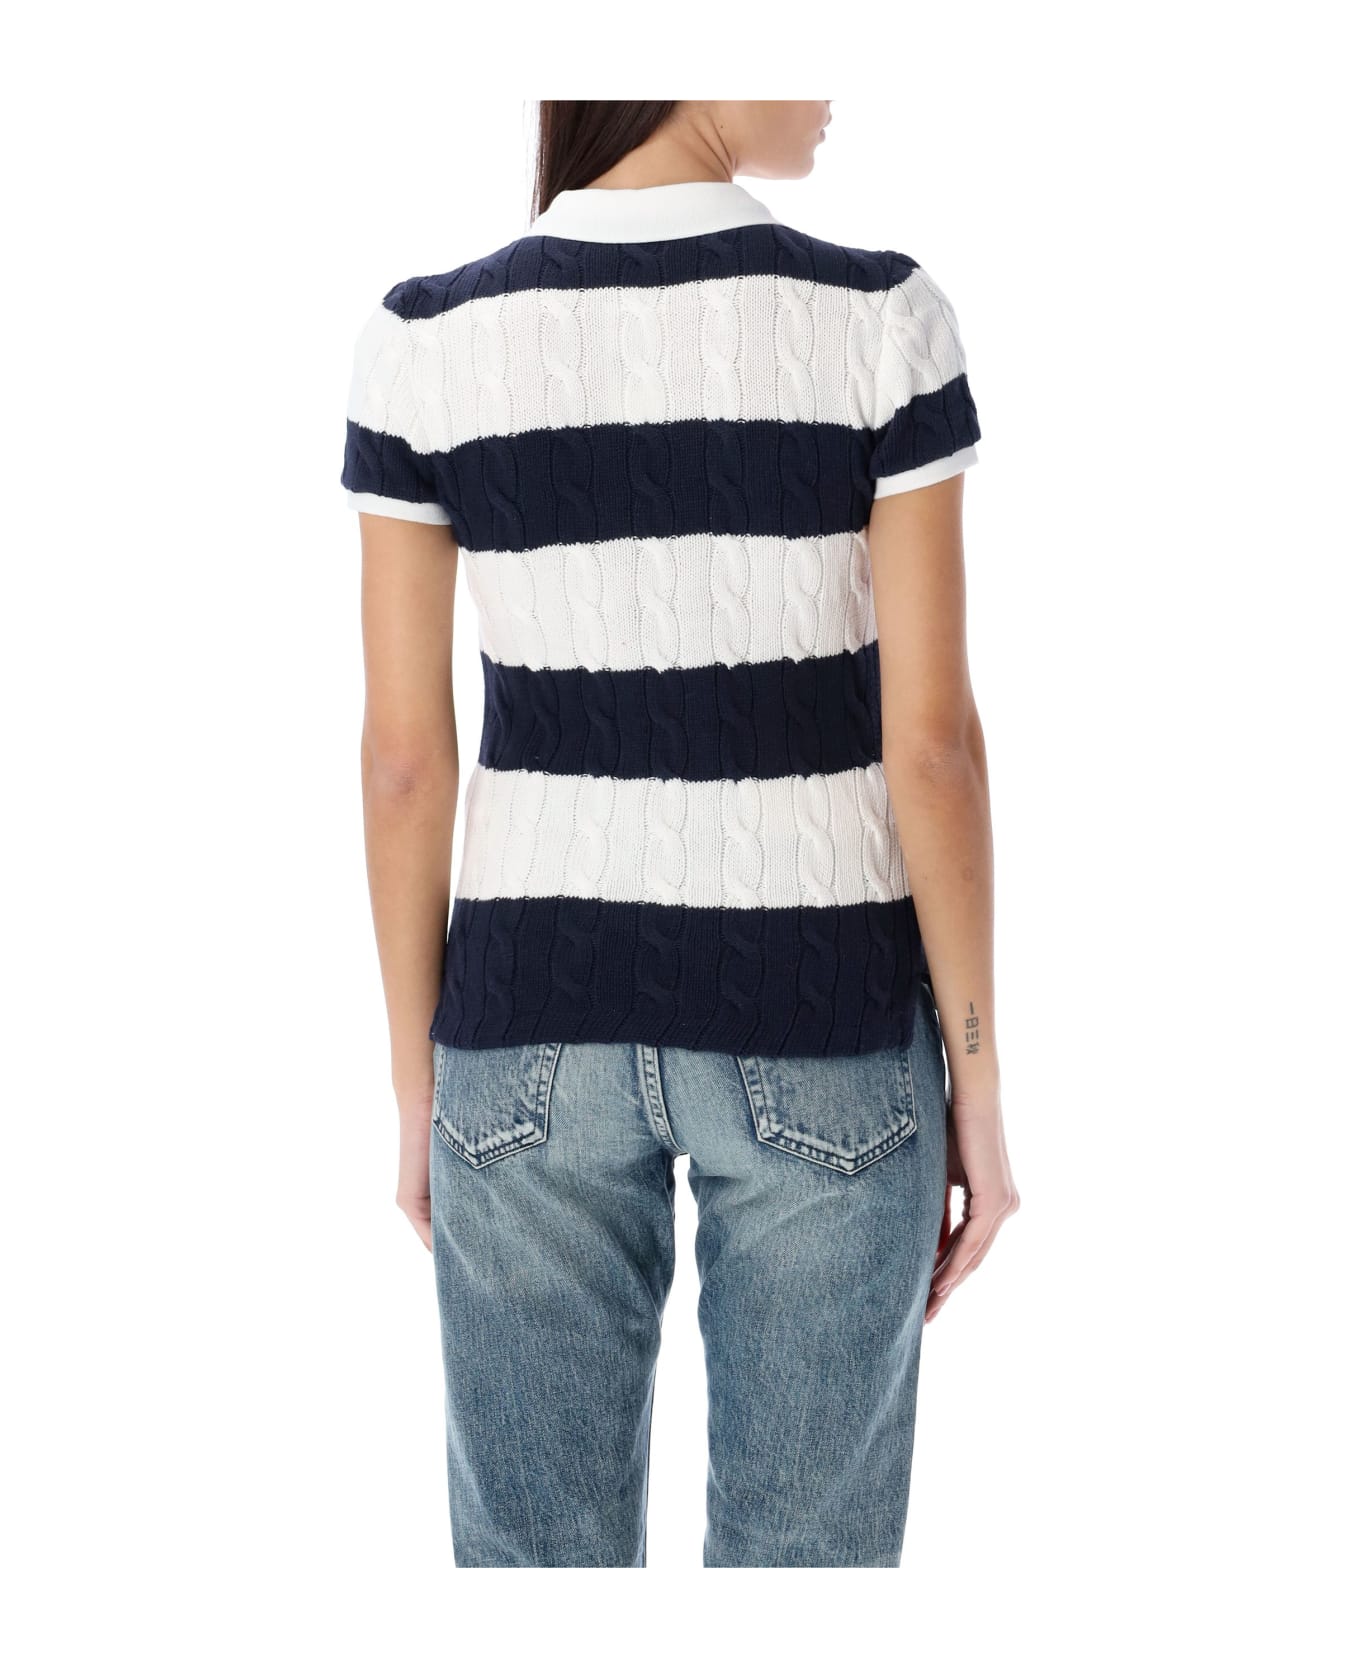 Polo Ralph Lauren Cotton Cable Knit Striped Polo Shirt - BLUE WHITE ポロシャツ